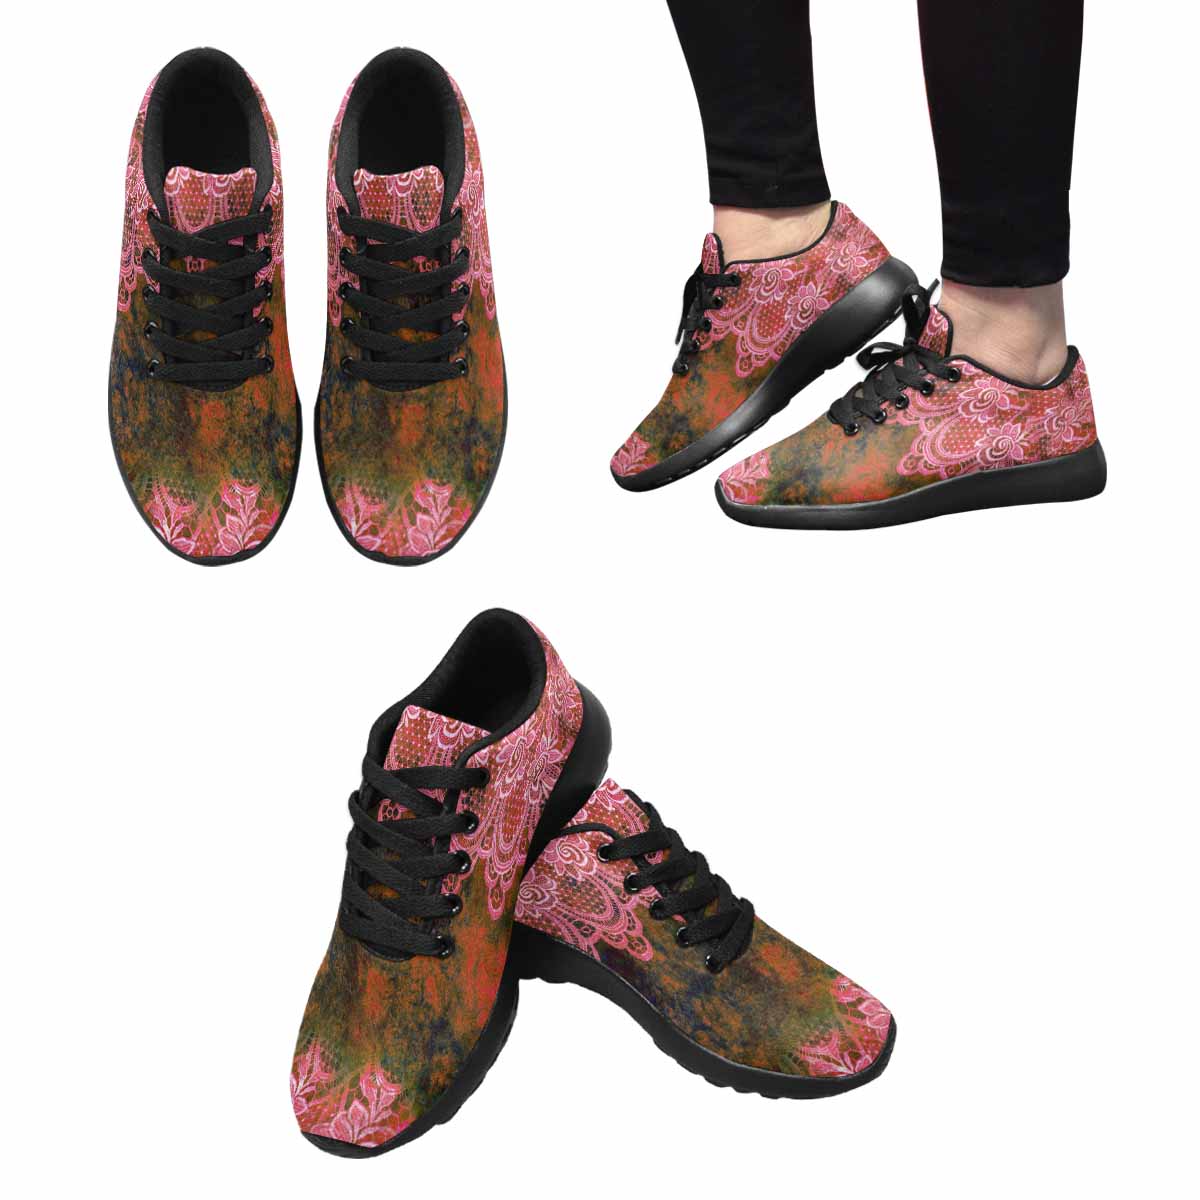 Victorian lace print, womens cute casual or running sneakers, design 32